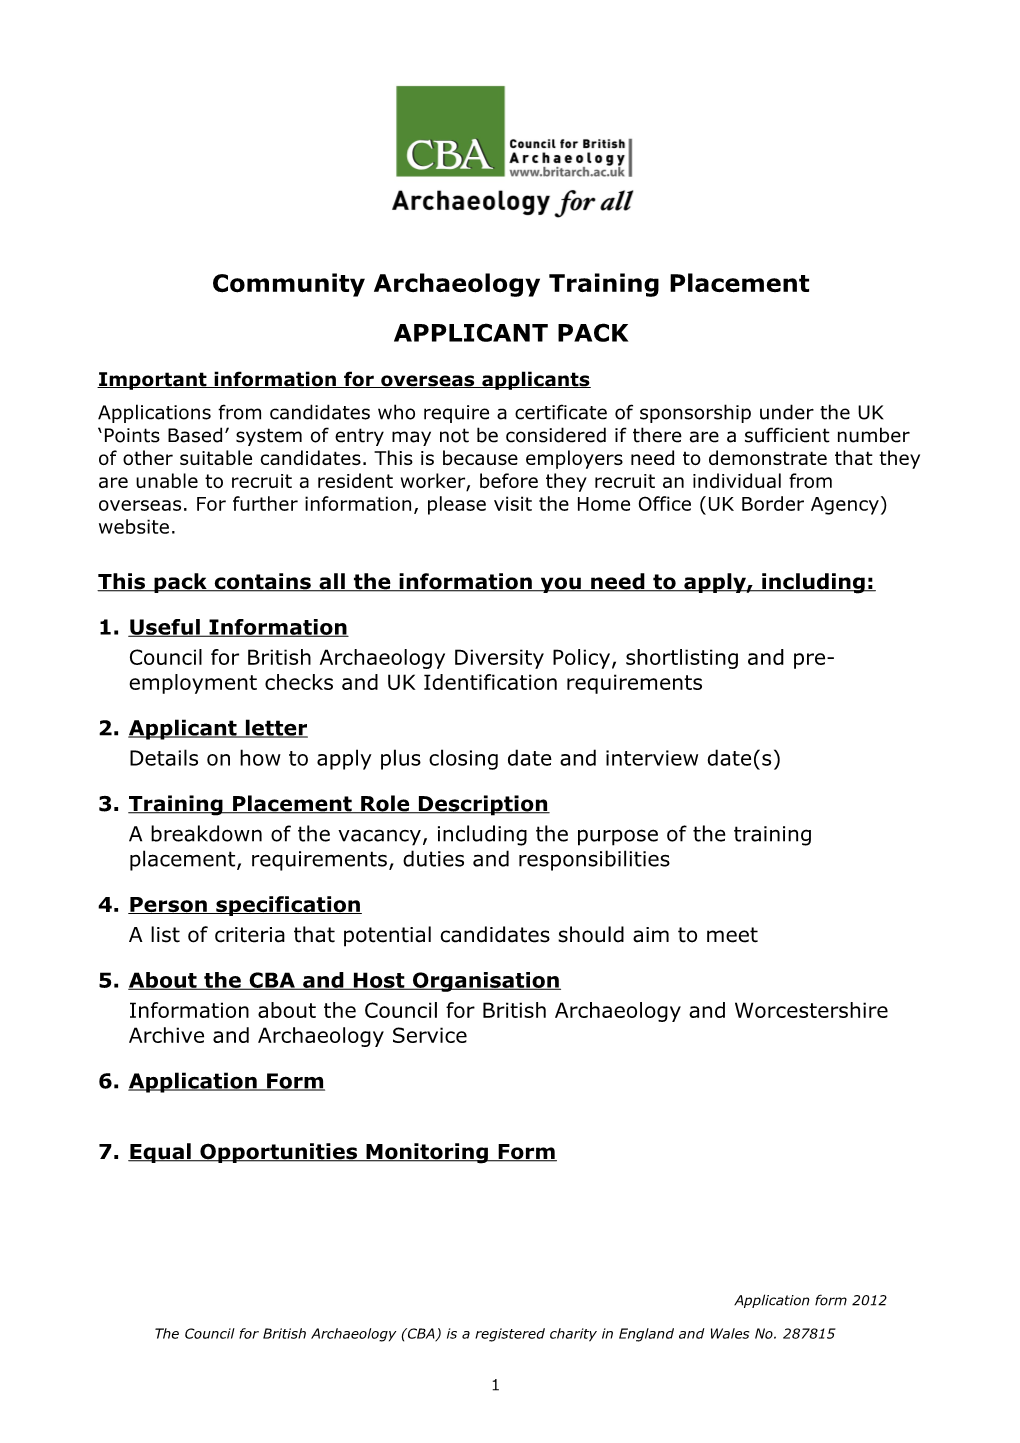 Community Archaeology Training Placement